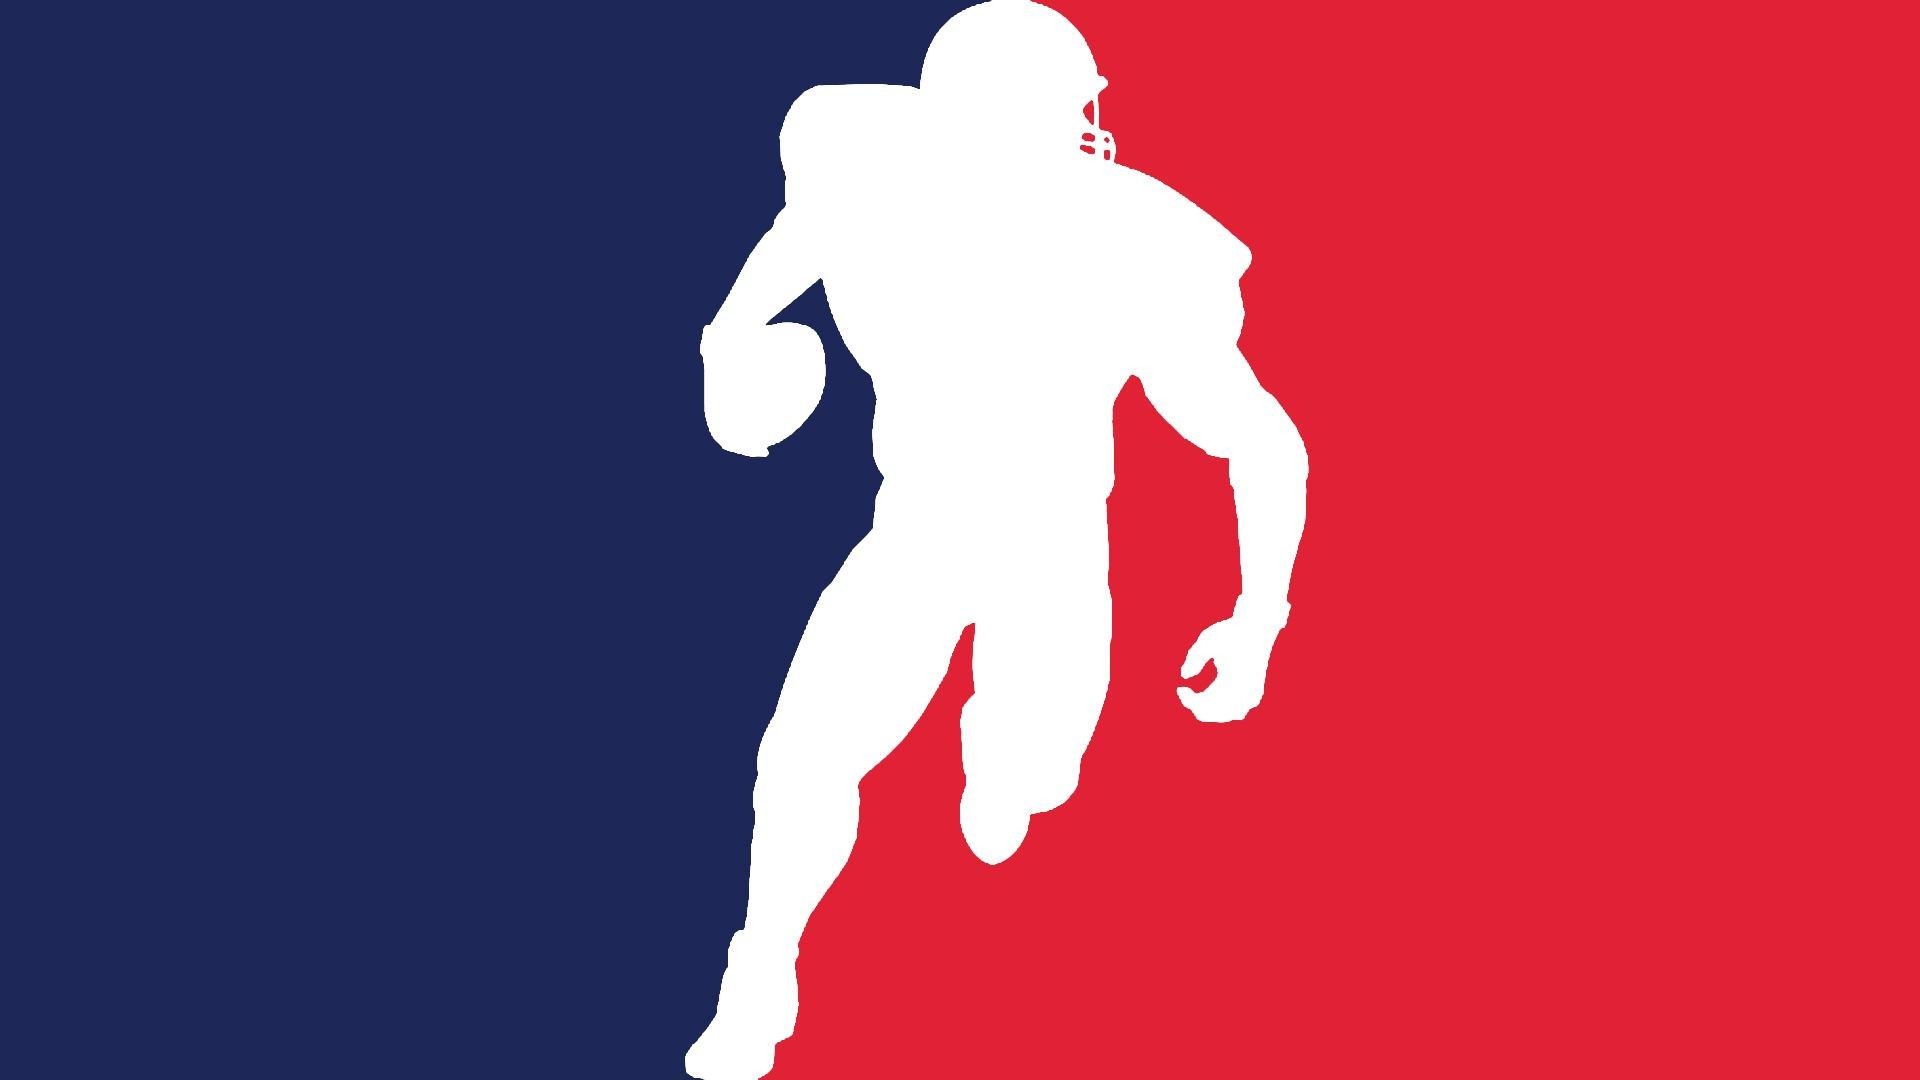 NFL Wallpaper HD With high-resolution 1920X1080 pixel. You can use this wallpaper for your Mac or Windows Desktop Background, iPhone, Android or Tablet and another Smartphone device